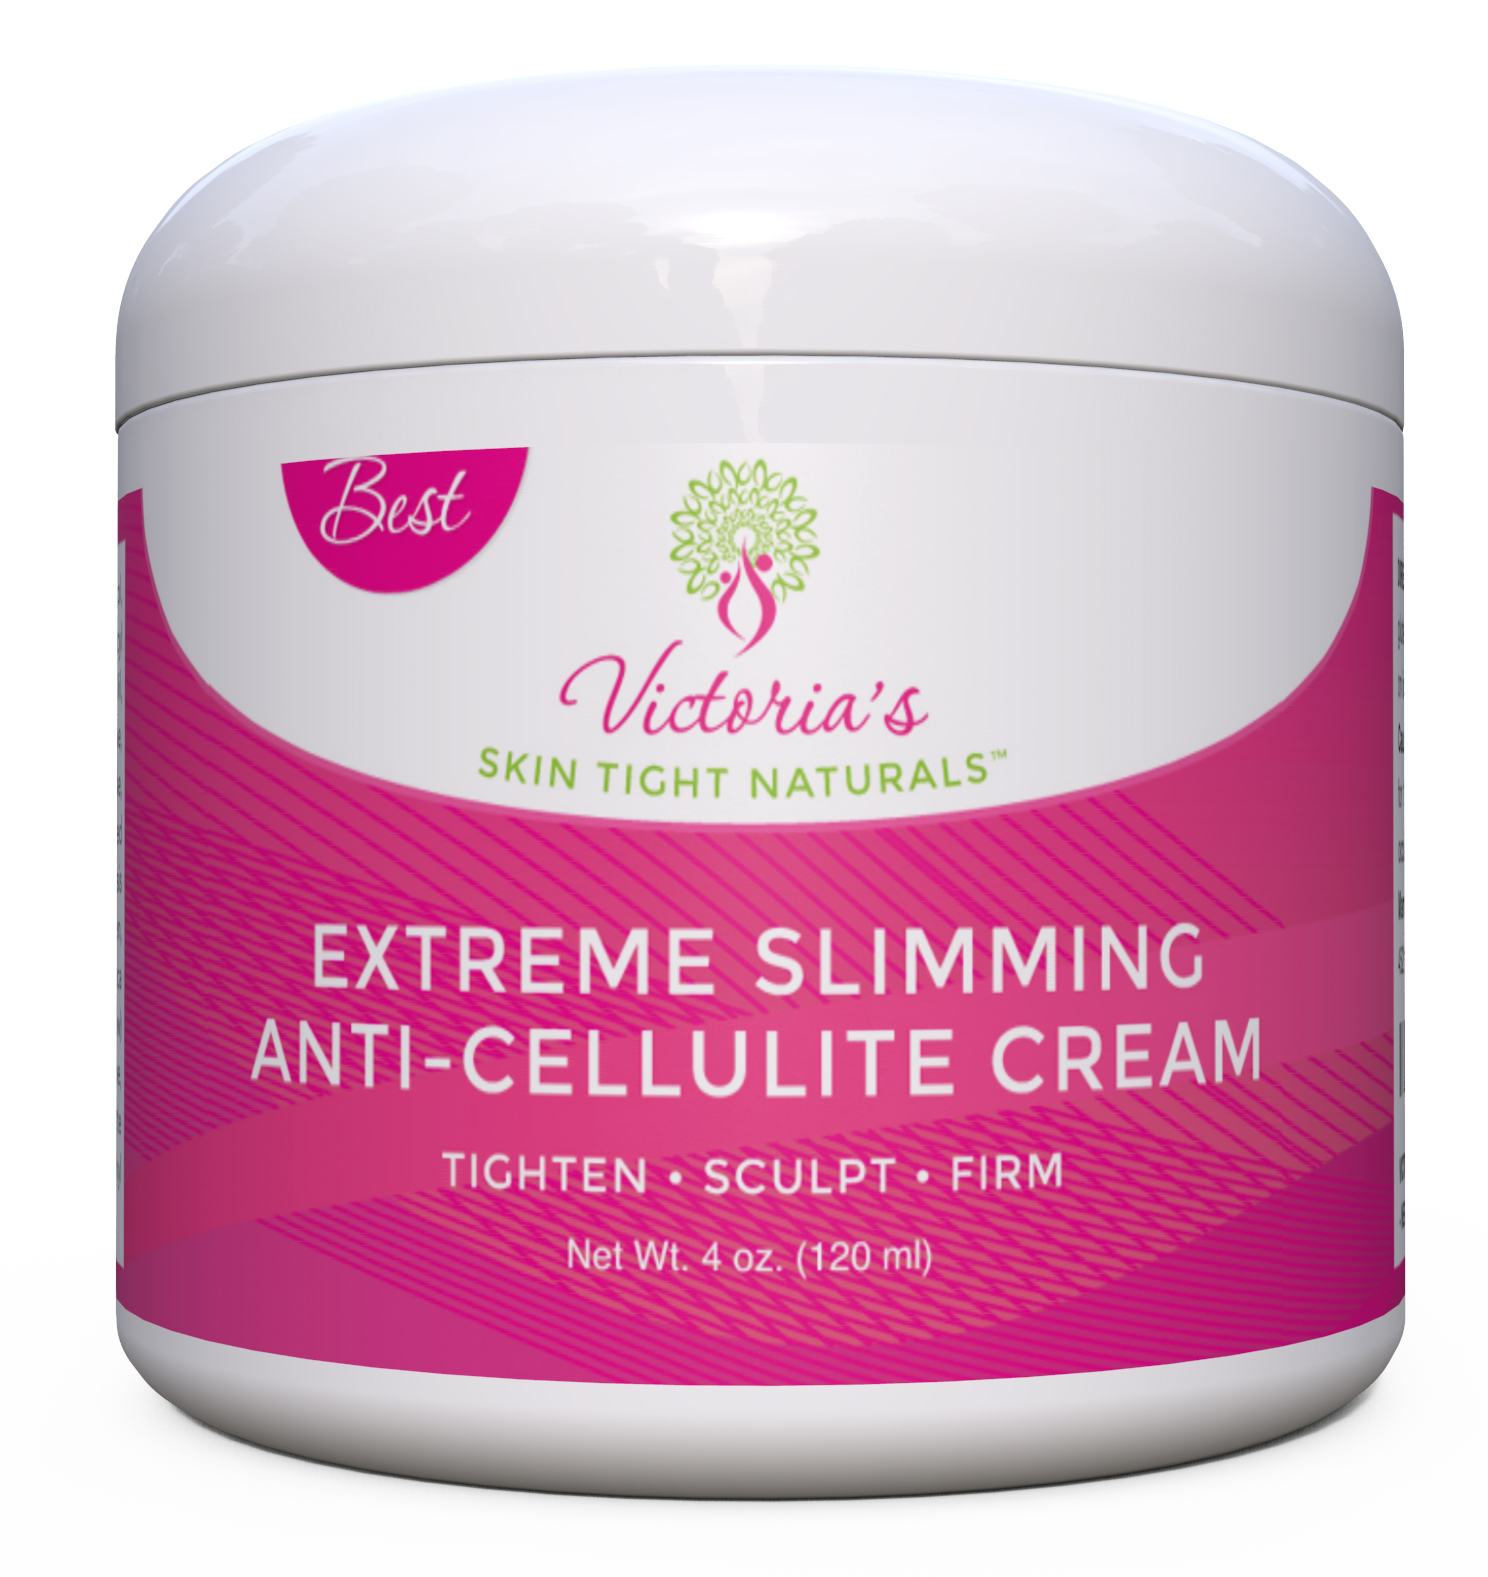 Best Cellulite Cream for getting rid of cellulite